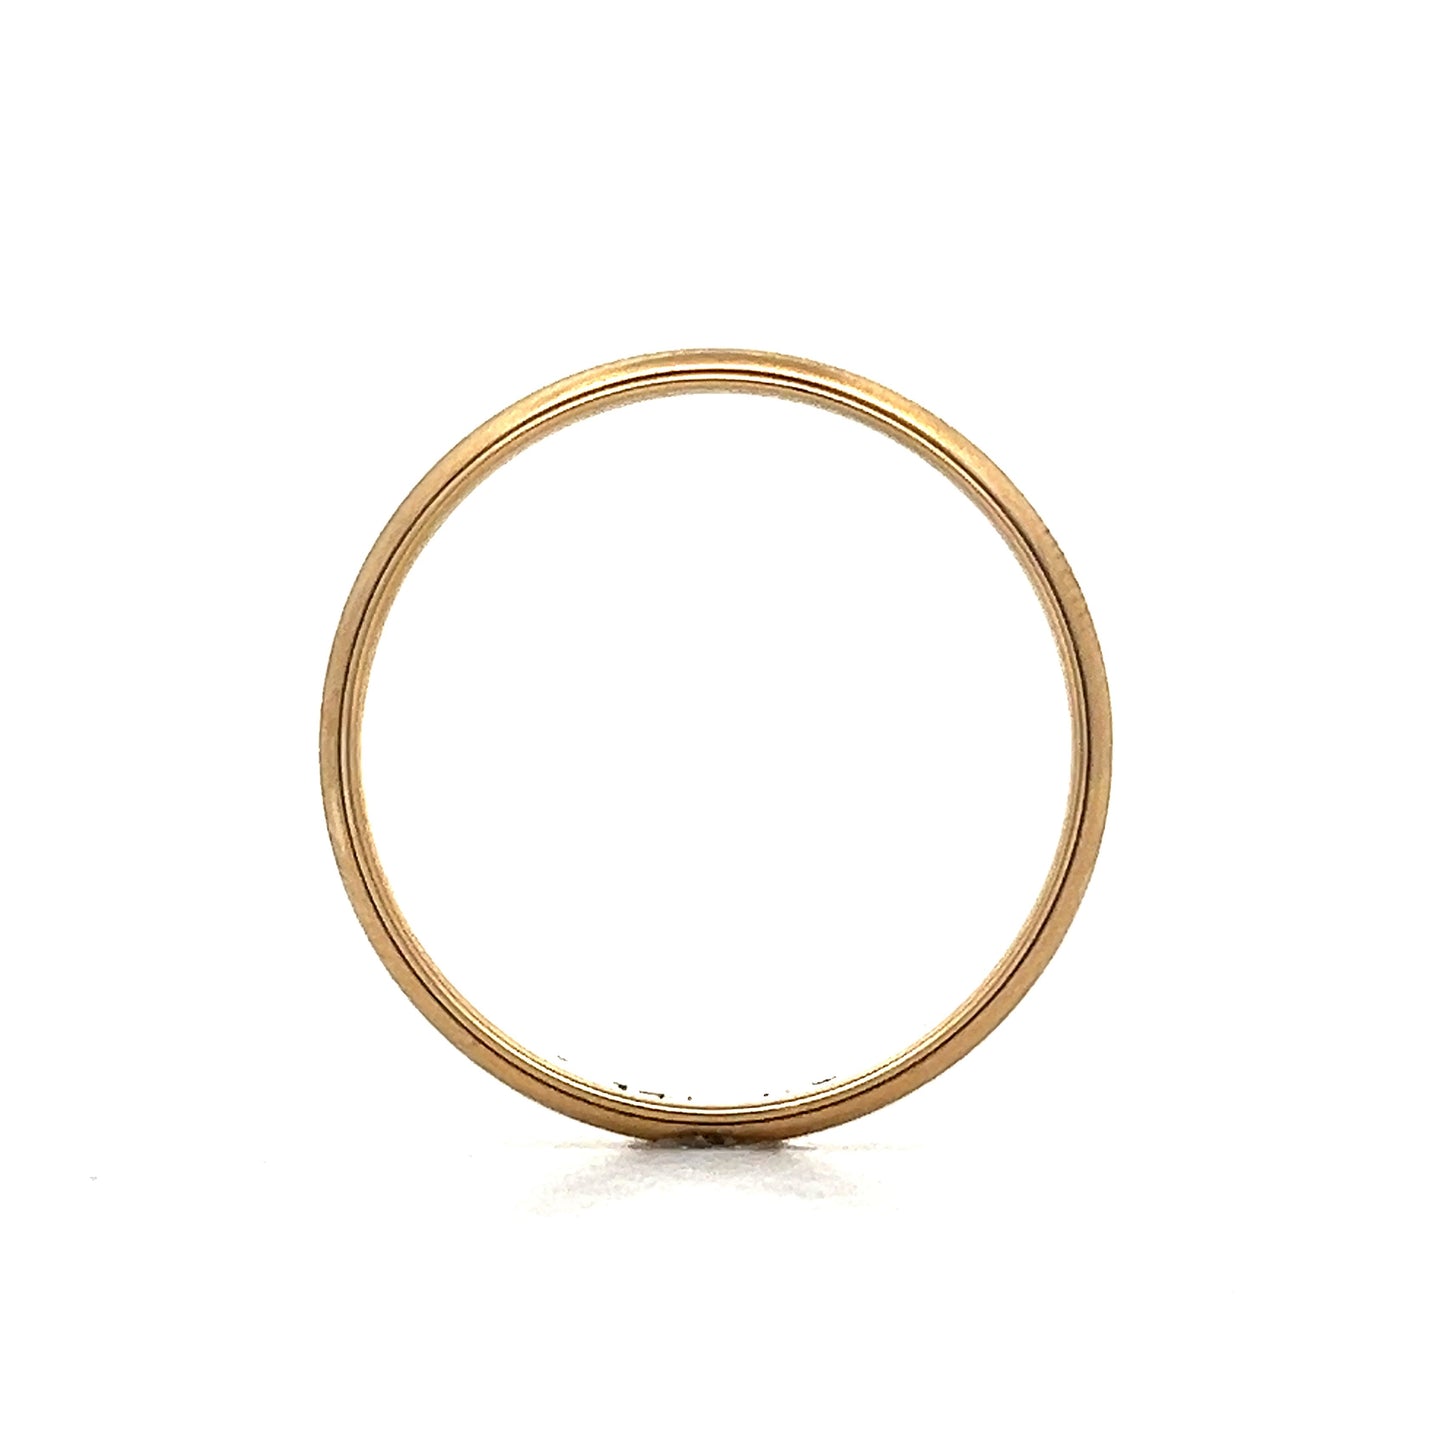 Men's Simple Classic Mid-Century Wedding Band in Yellow Gold